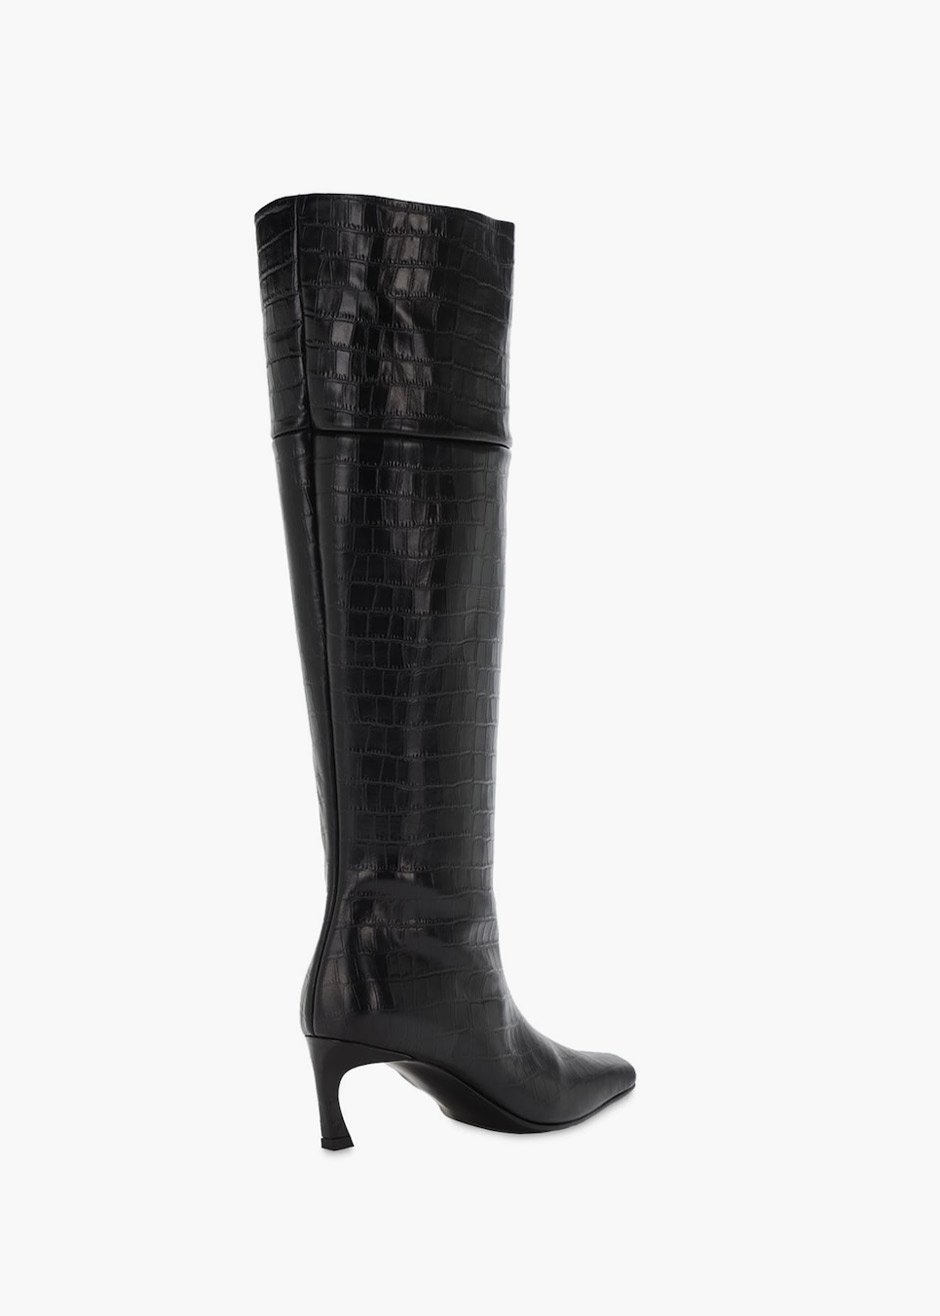 Reike Nen Embossed Leather Tall Boots - Black - 4